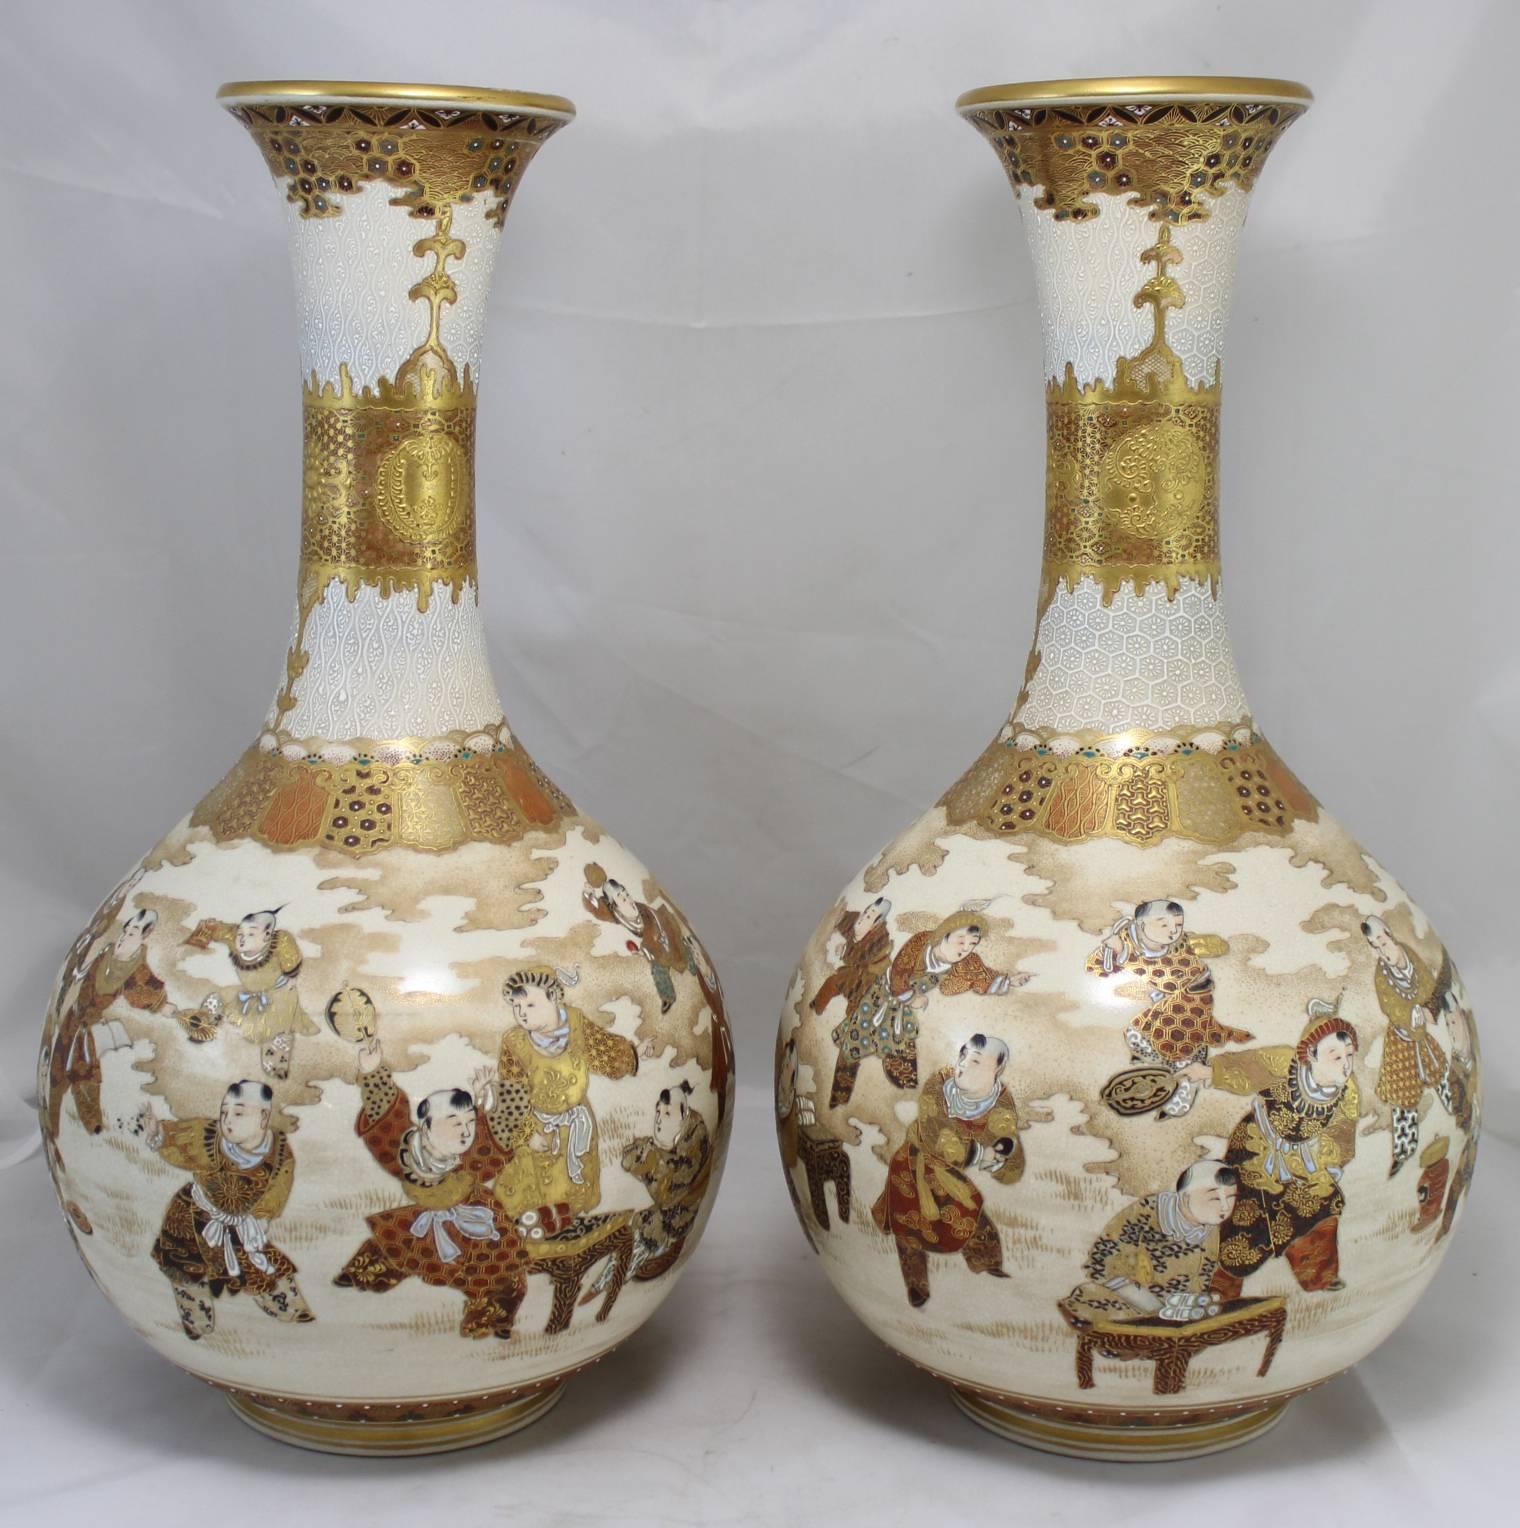 This is a splendid pair of polychrome Meiji period Japanese Satsuma bulbous form vases, unsigned, each depicting a continuous scene with multiple figures around the body of the vase, highlighted with gilt decoration overall.